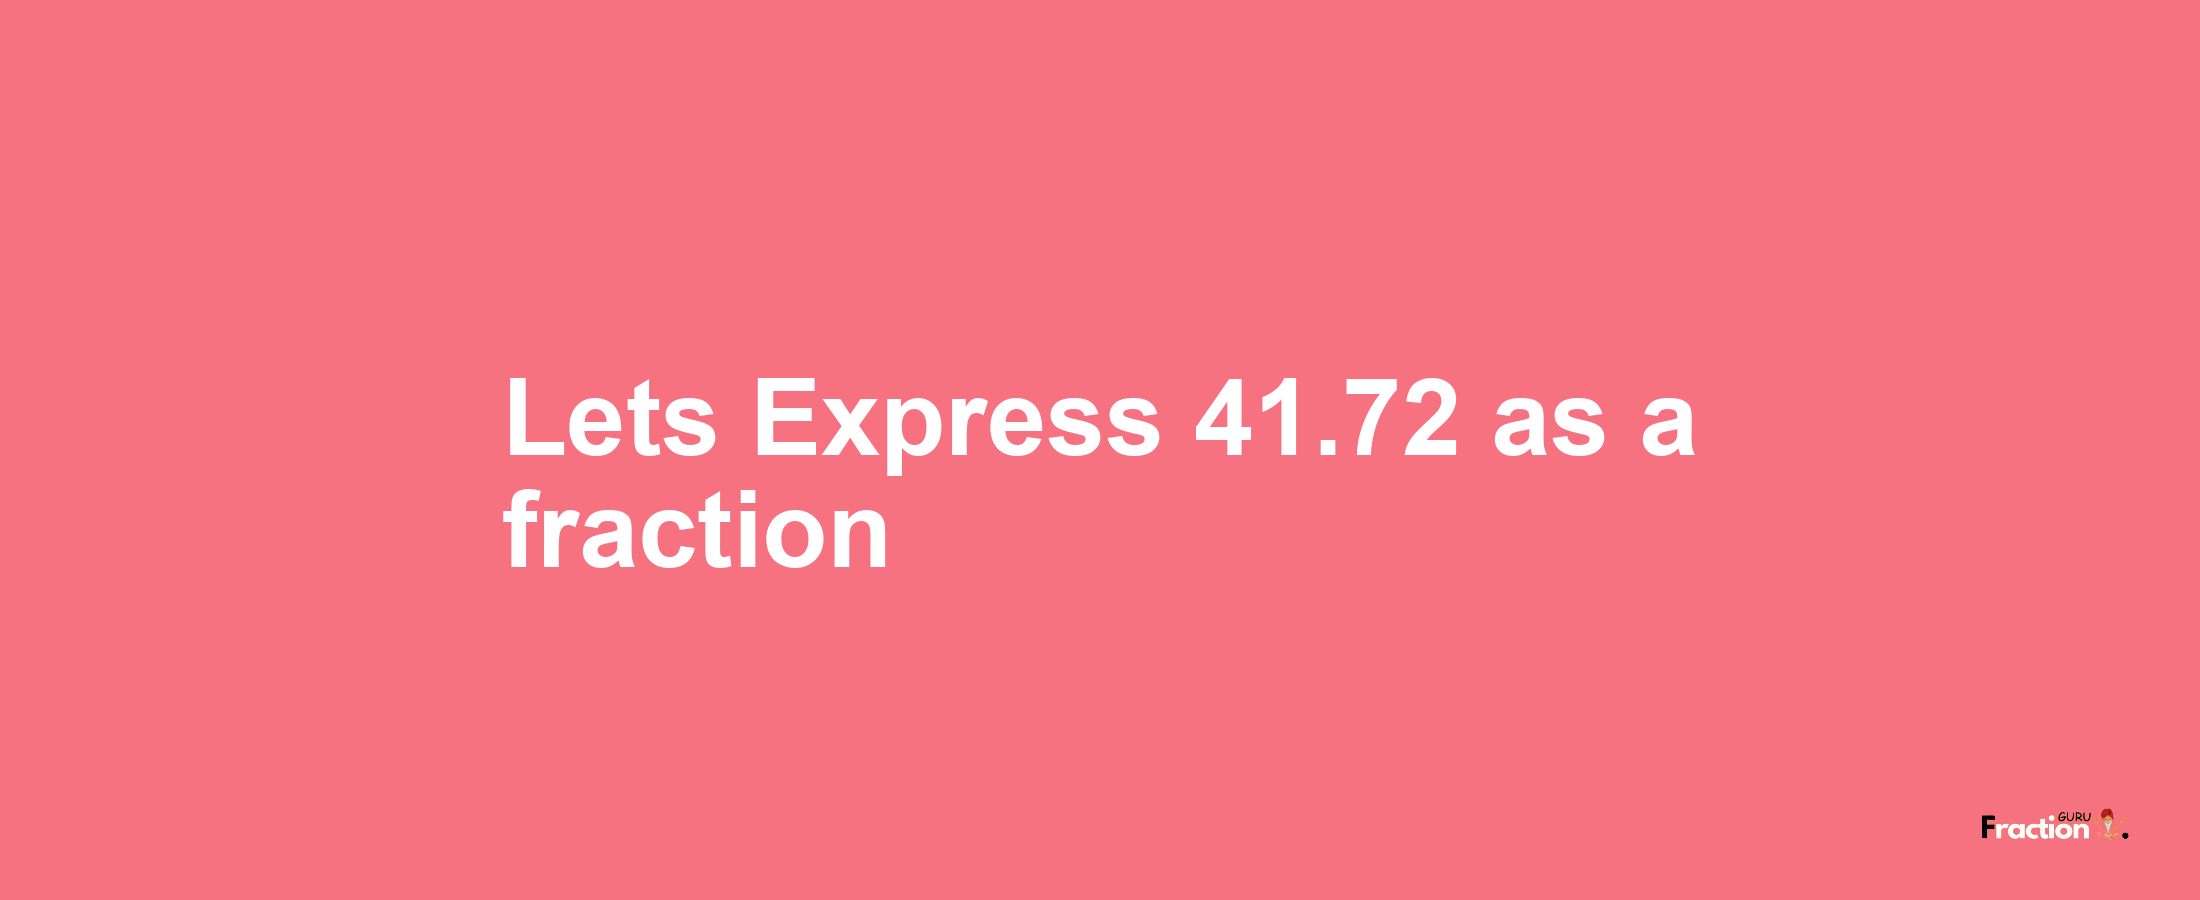 Lets Express 41.72 as afraction